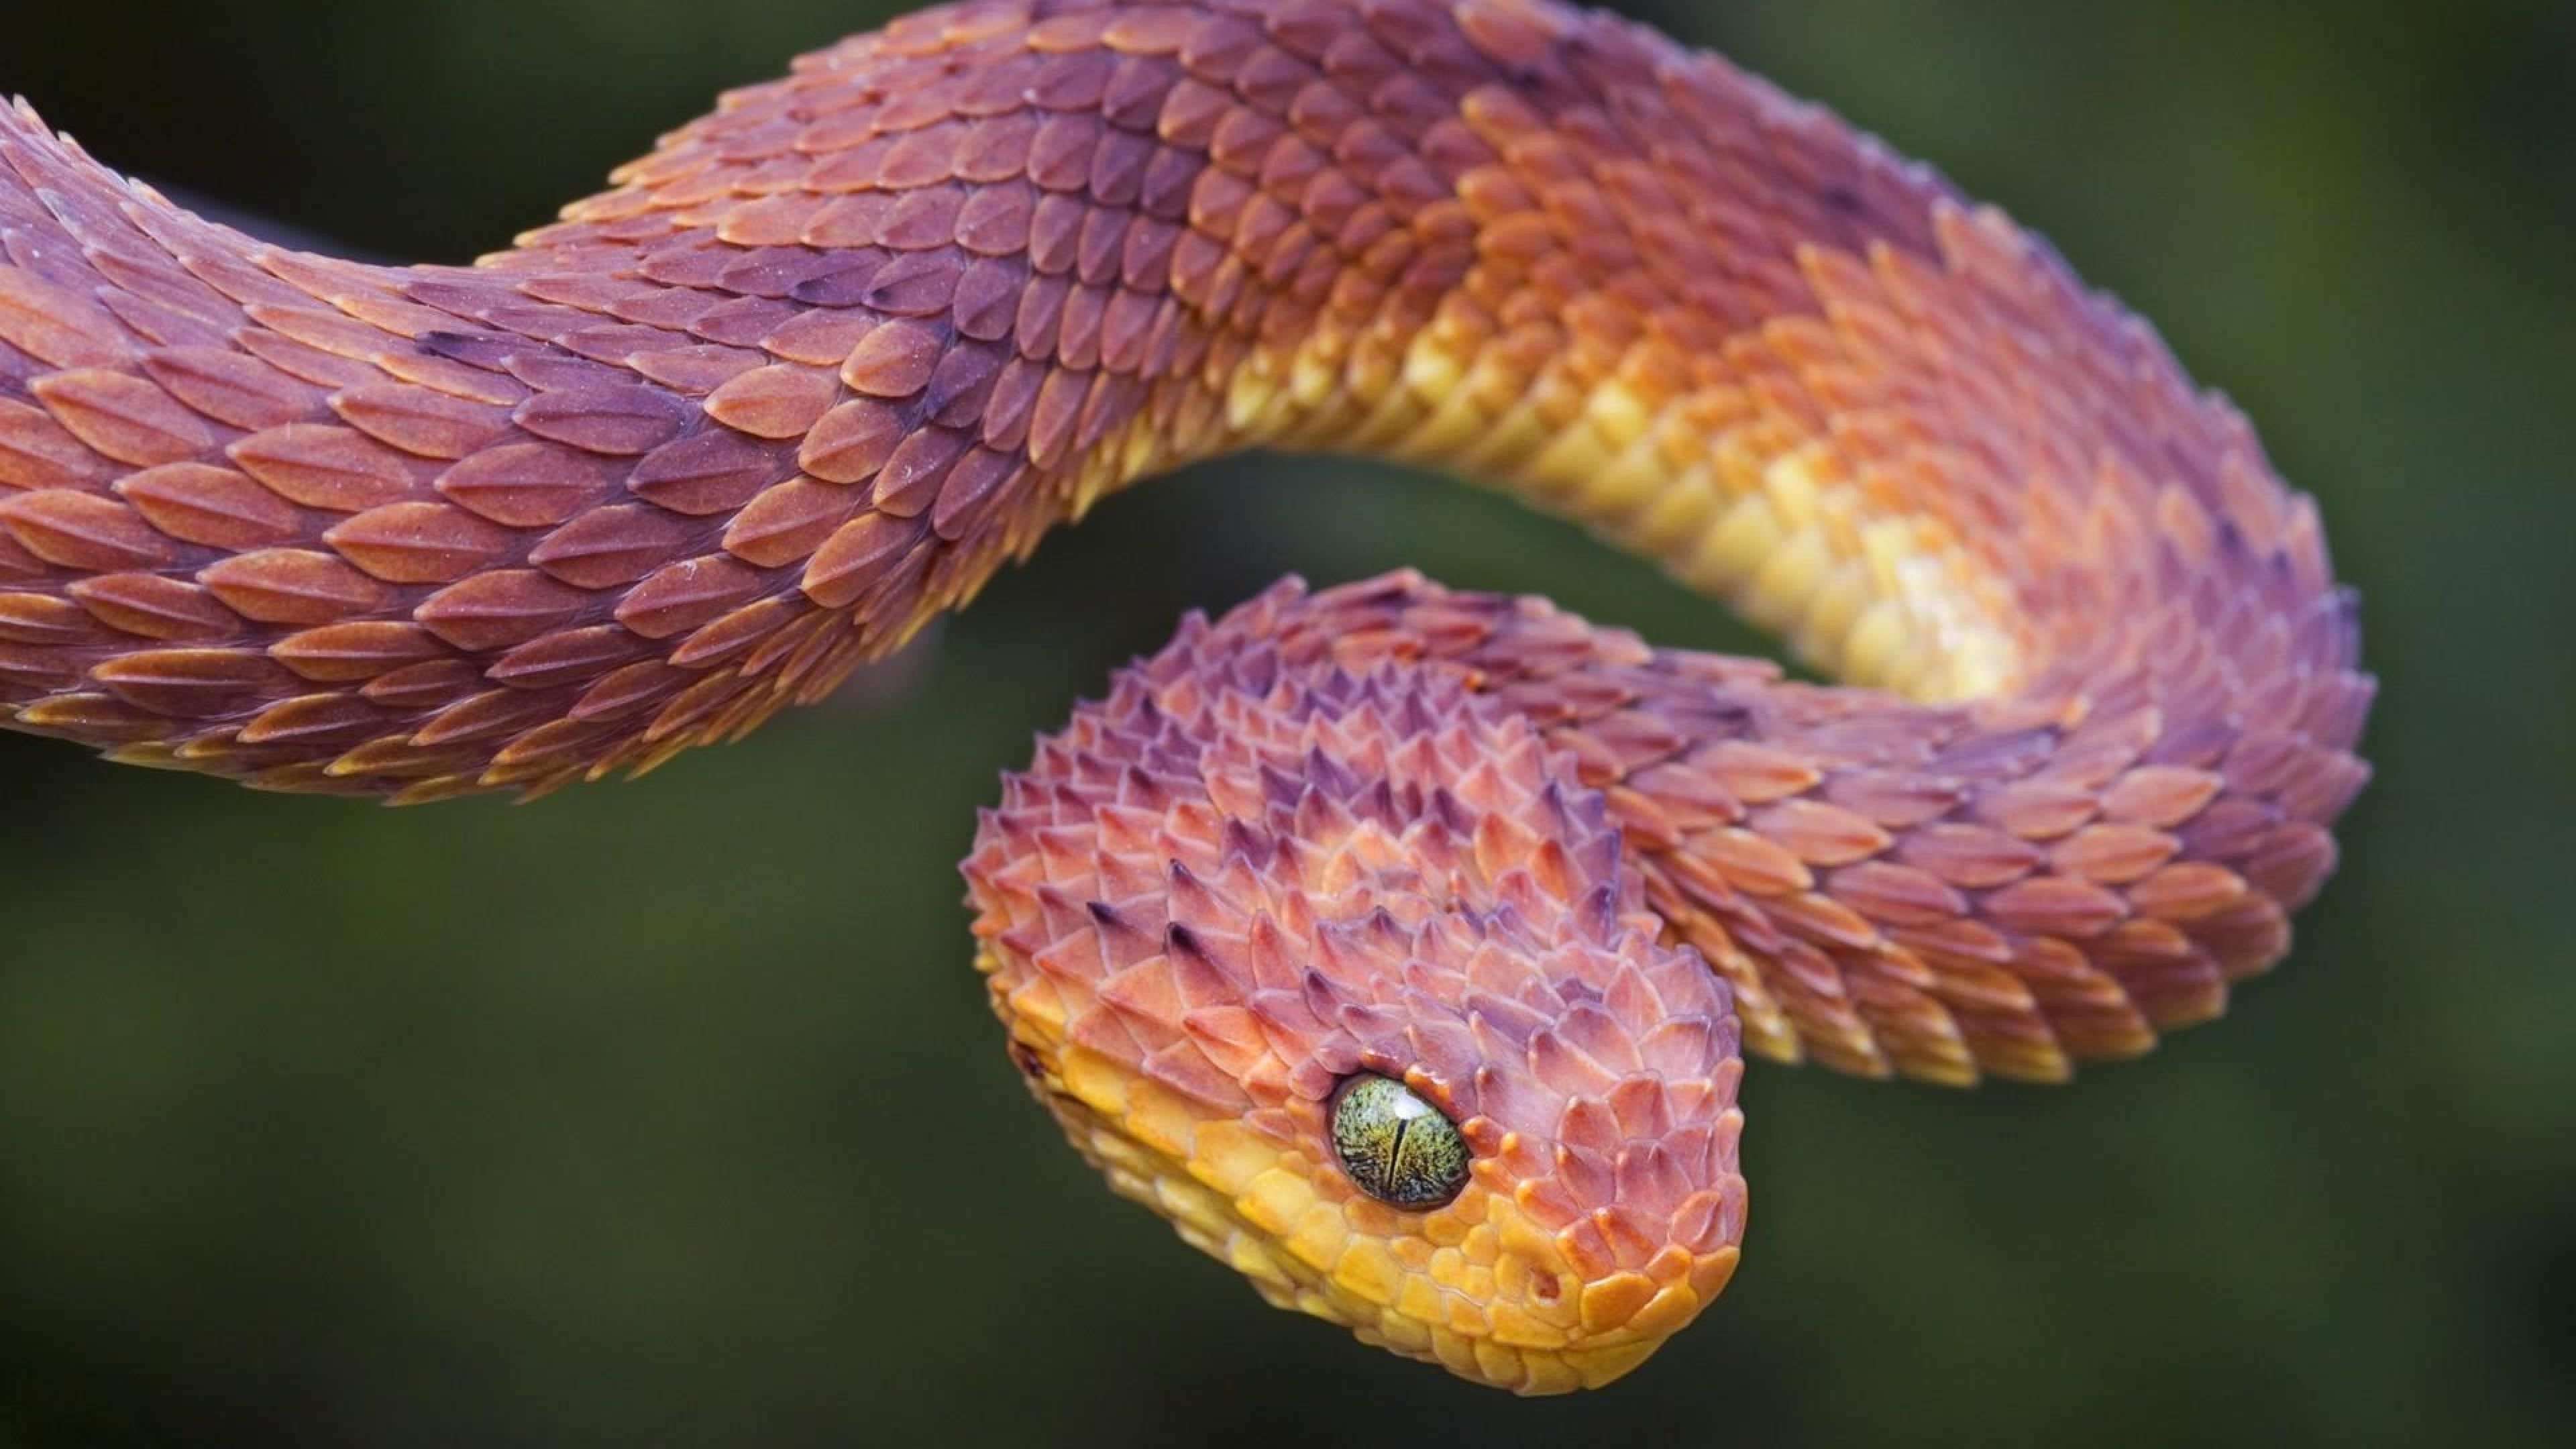 A close up of an orange snake with green eyes - Snake